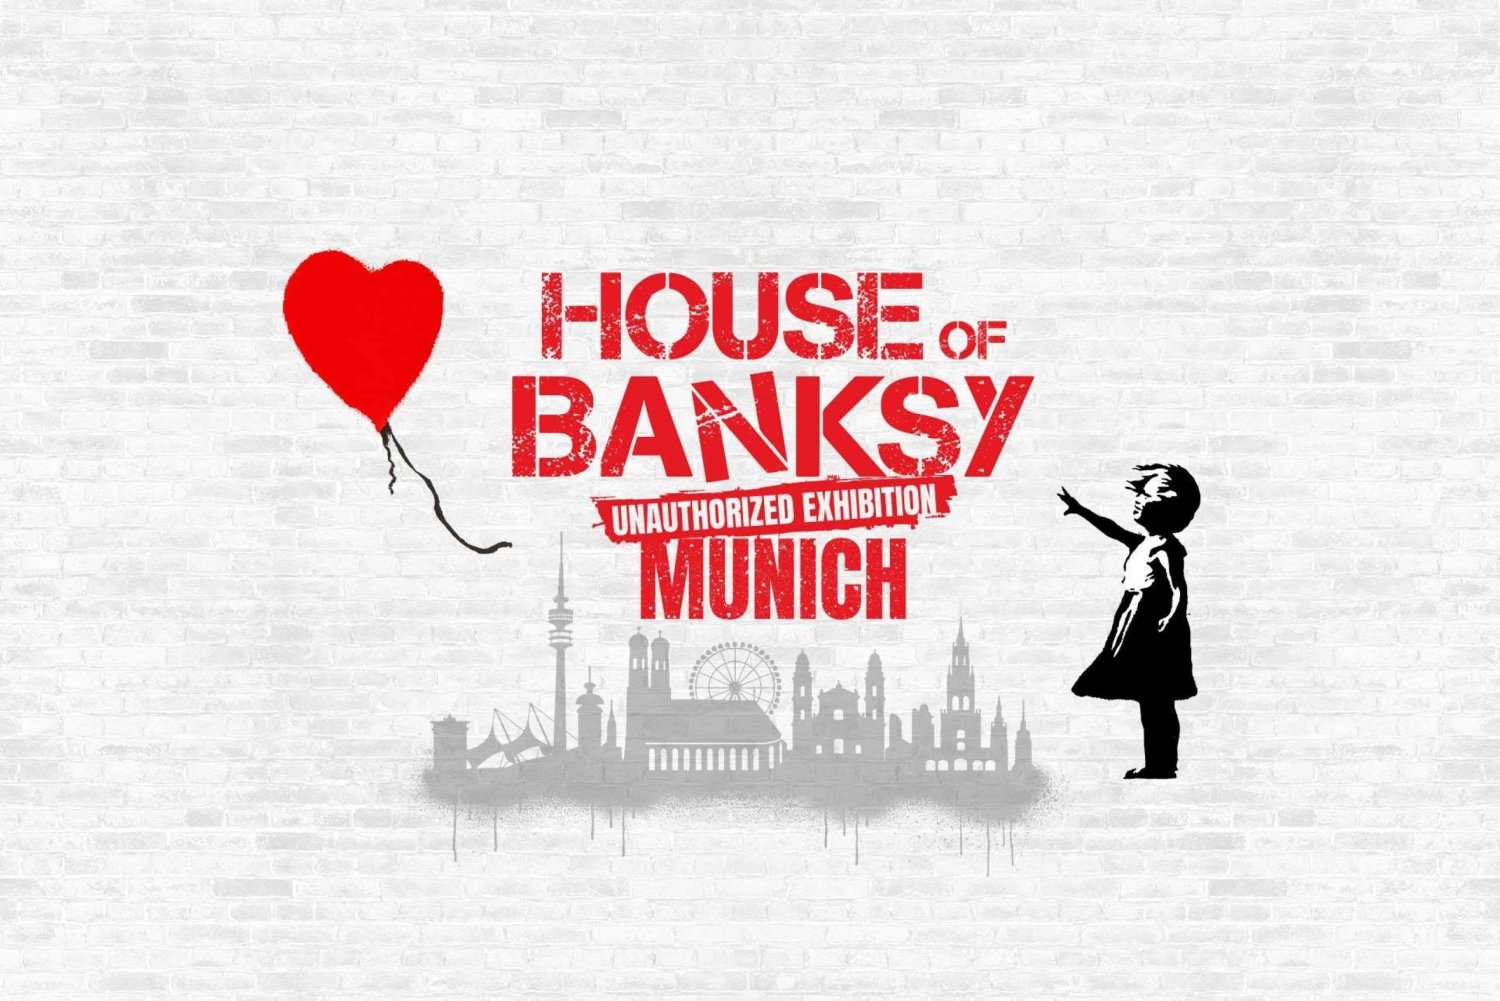 Munich: “House of Banksy” exhibition - day ticket